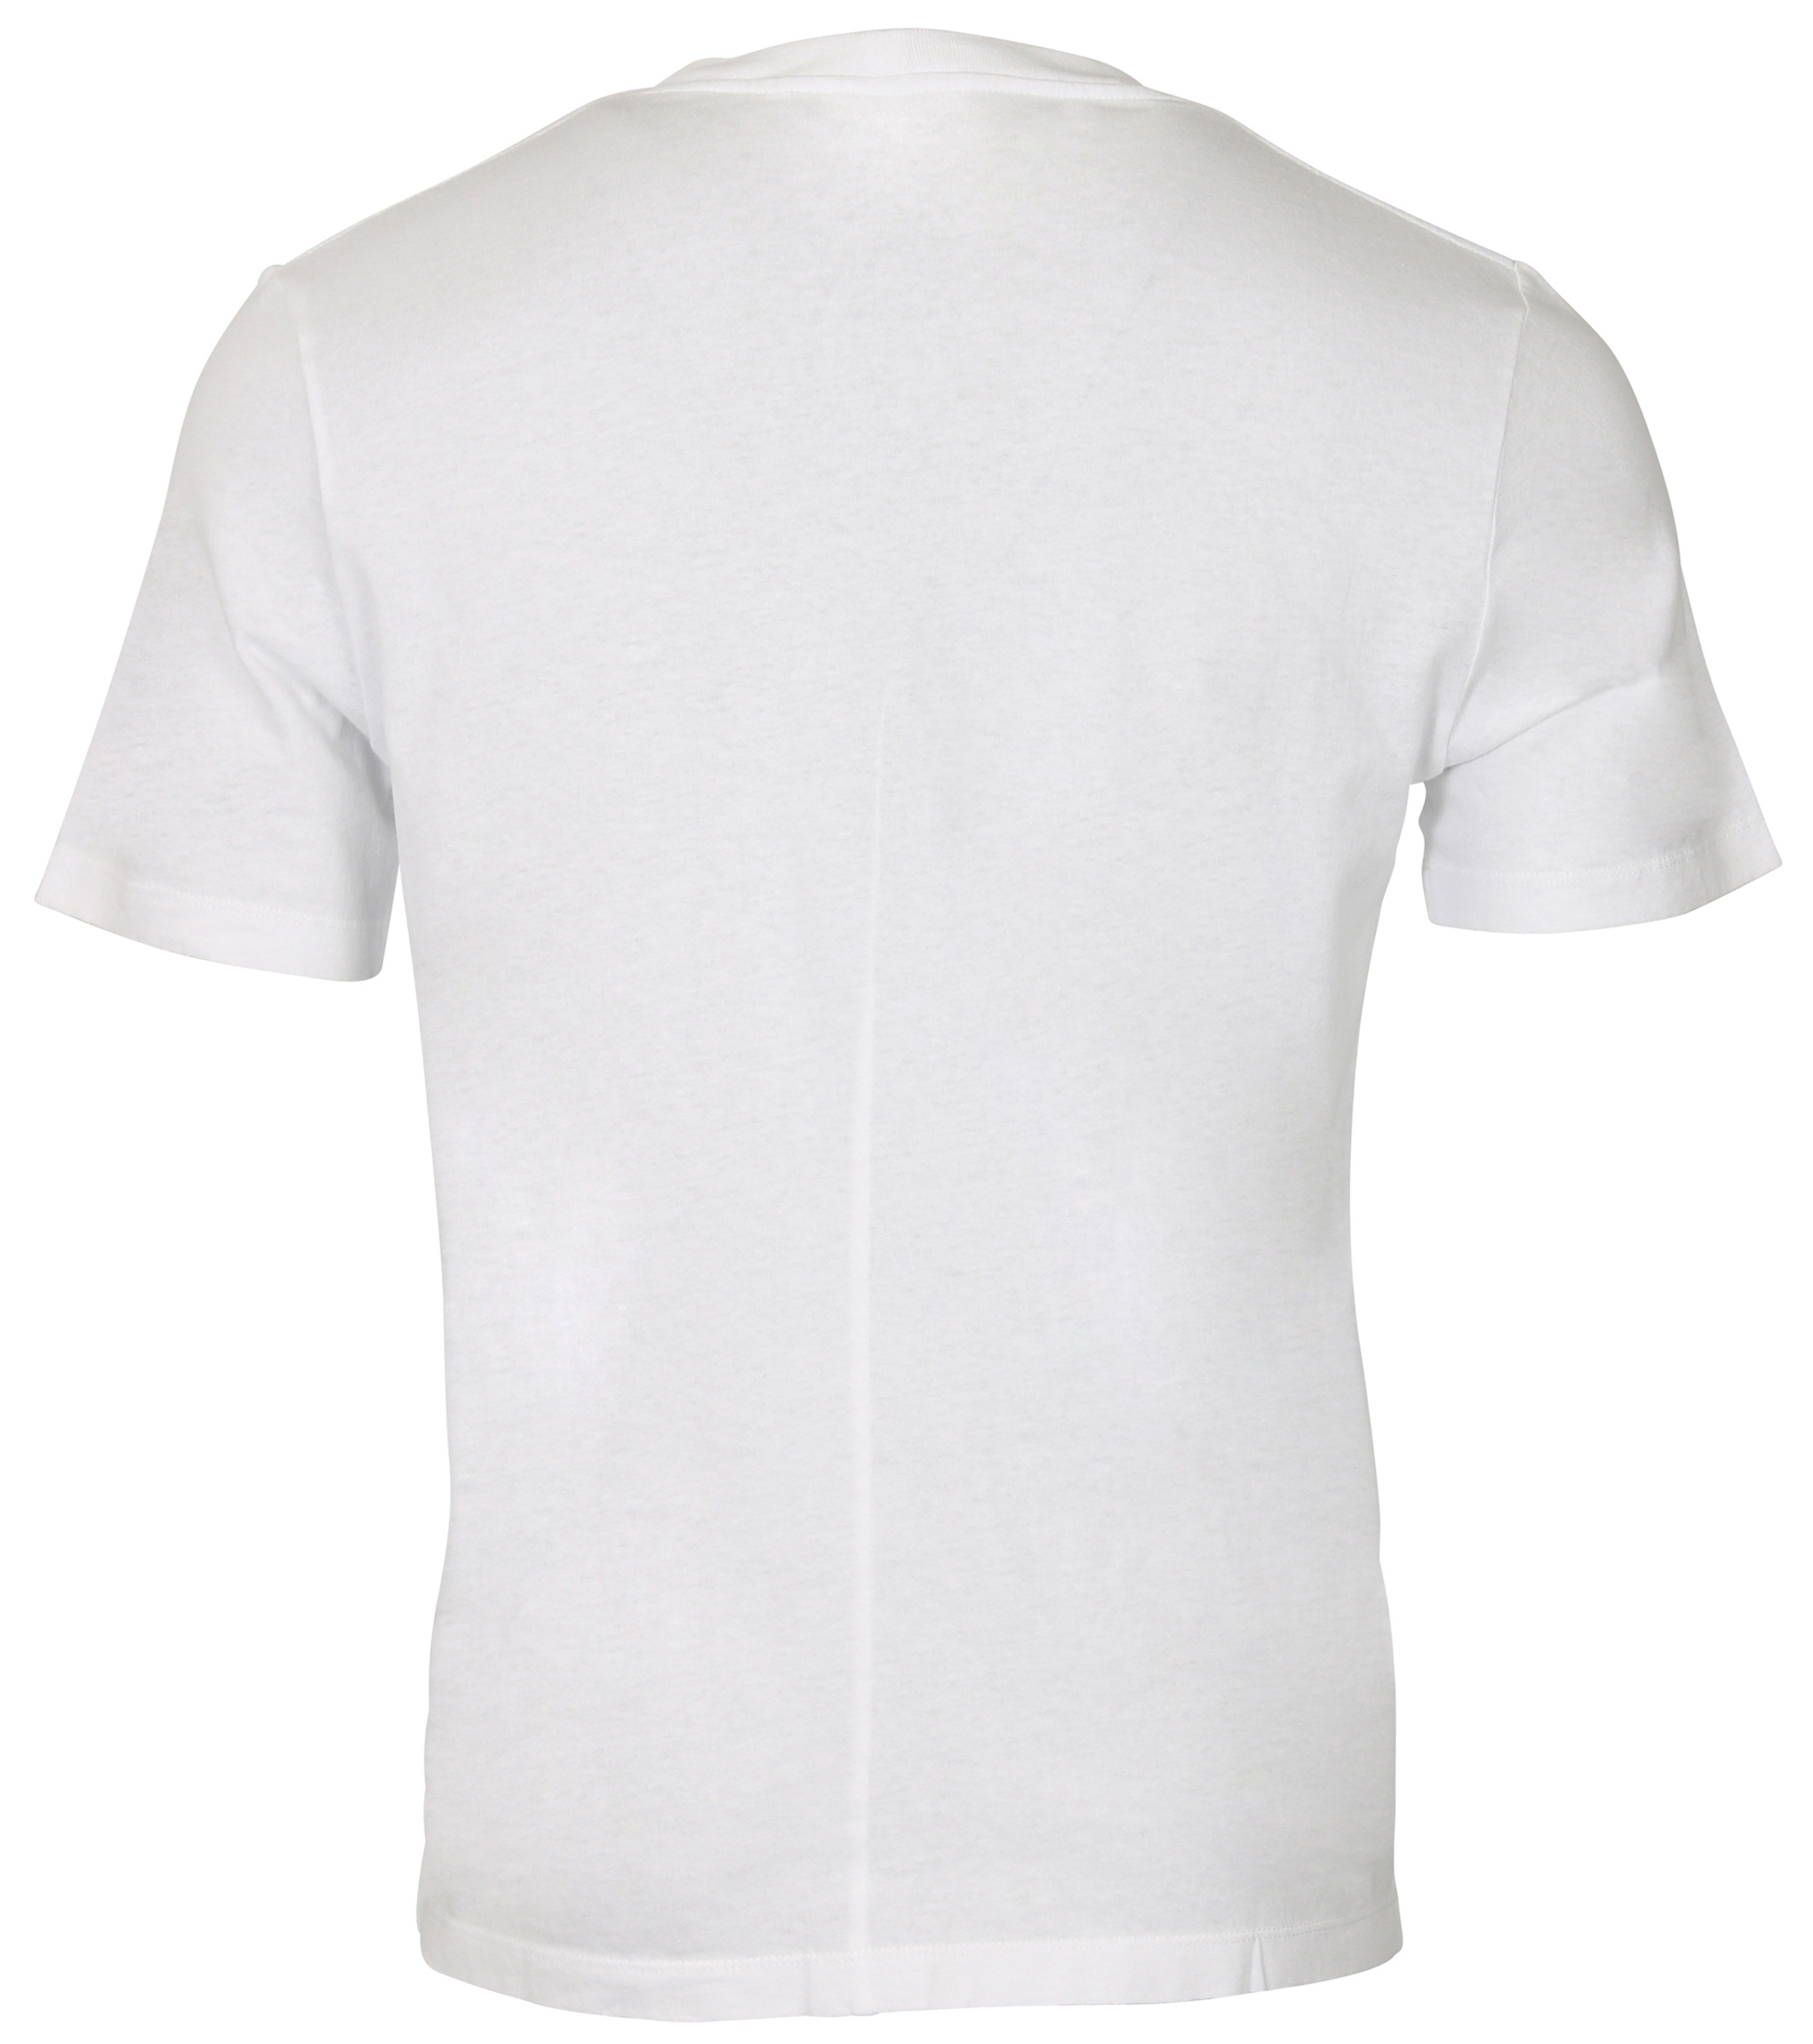 Helmut Lang Patch T-Shirt White S